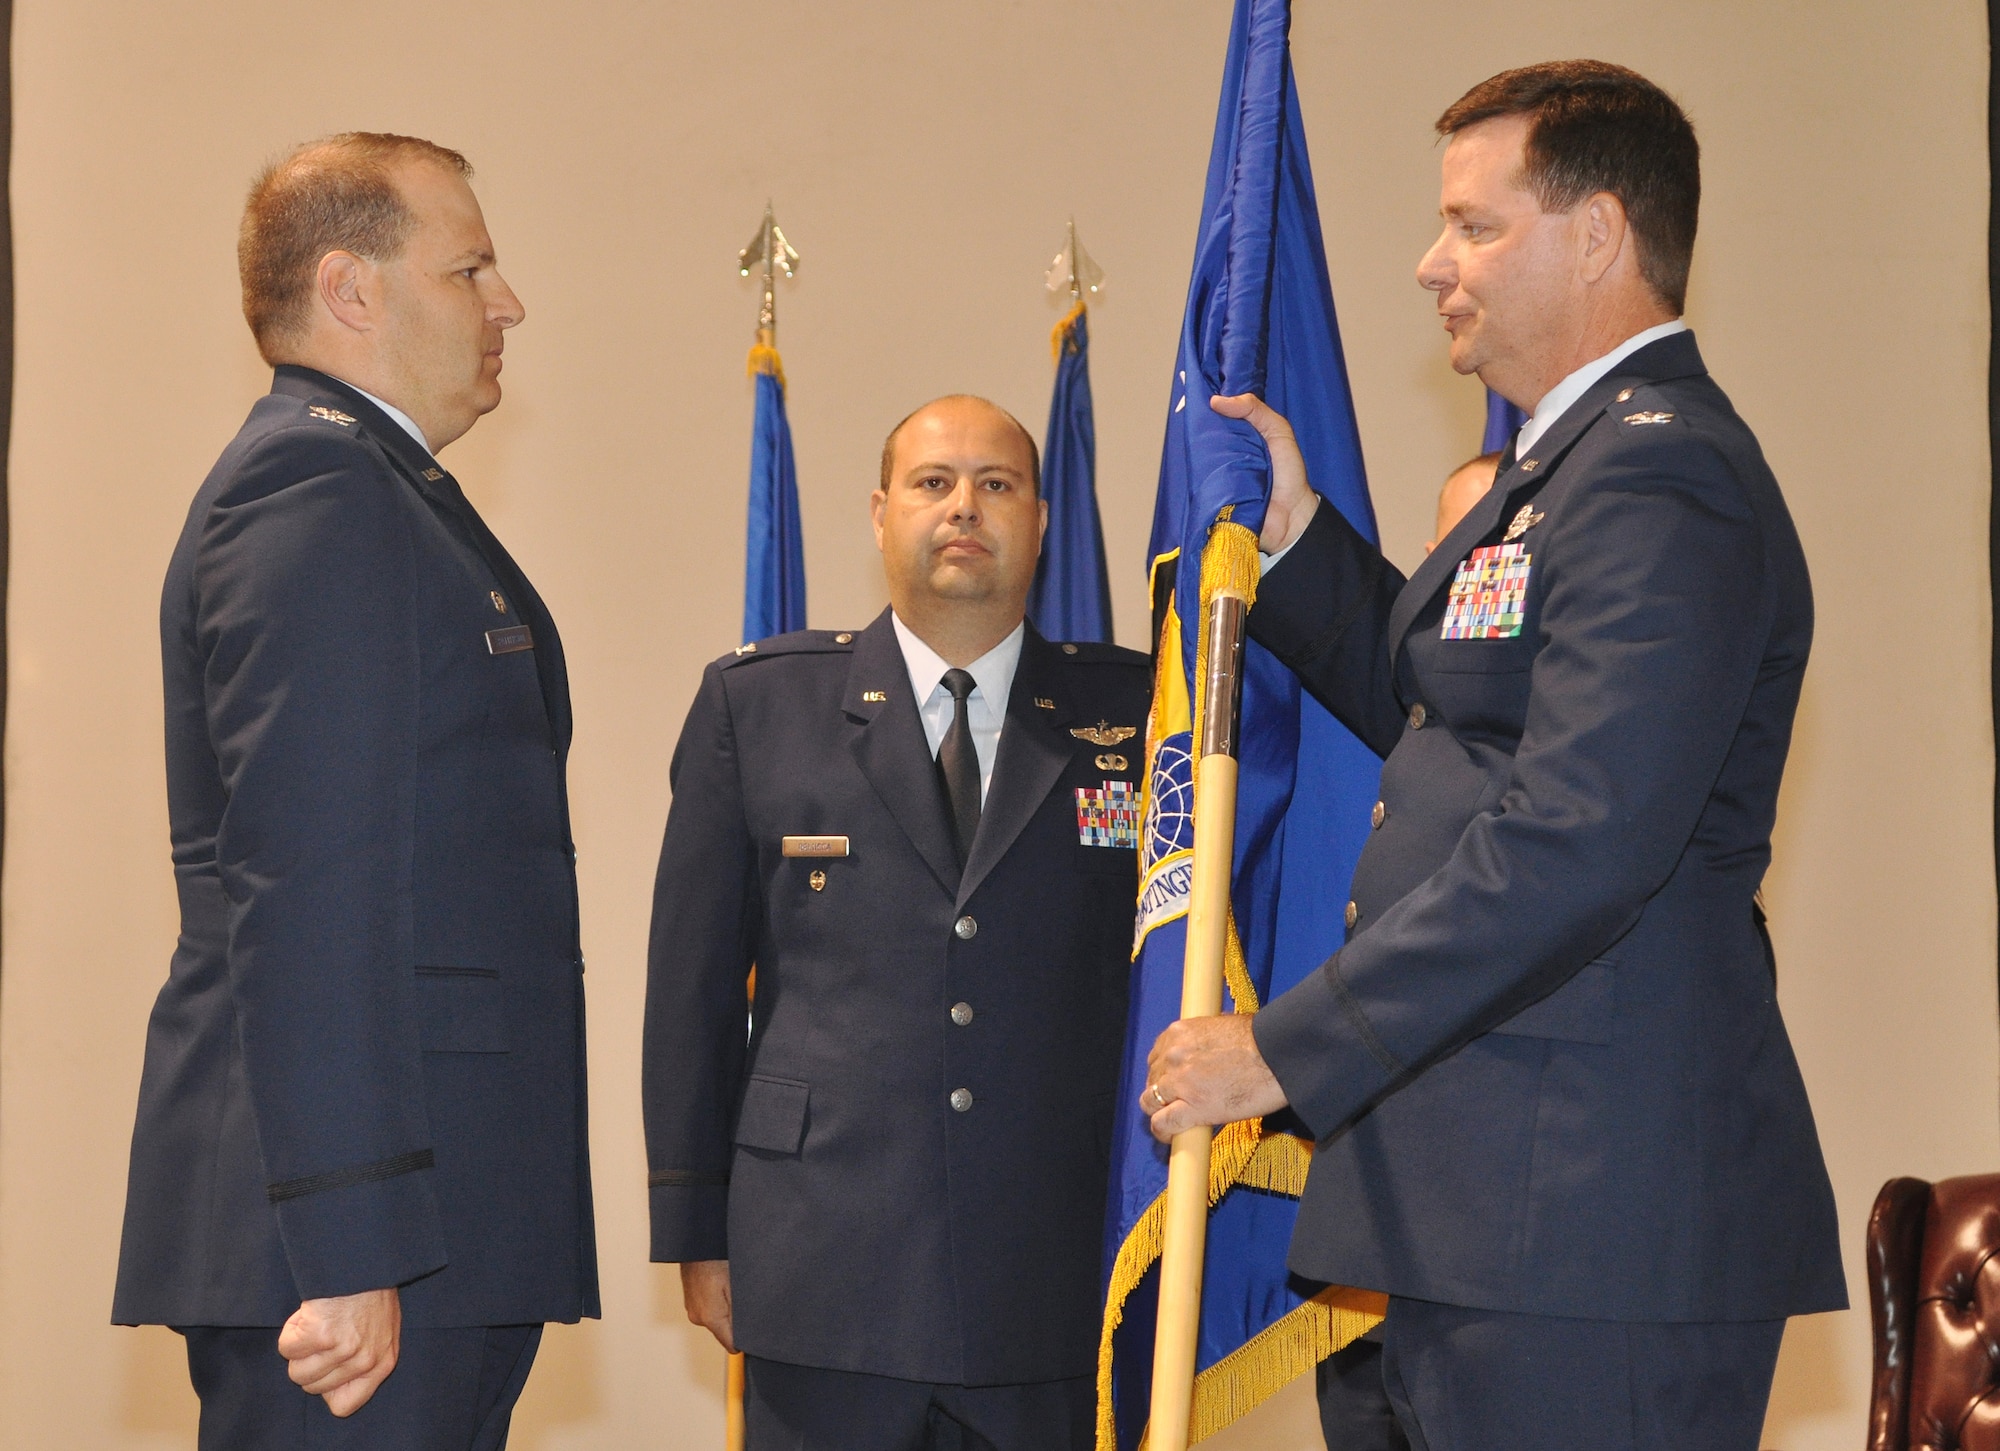 Colonel Gary Gottschall, former 615th Contingency Response Wing commander, prepares to transfer command of his units to Colonel Chris Patterson, 621 CRW, during the inactivation ceremony 615 CRW, May 29, 2012, at Travis Air Force Base, Calif. The 615 CRW ceased its operations as a sister wing, ending seven years of mobility excellence. The inactivation ceremony also included the transfer of command of the two contingency response groups and one contingency operations group to the 621st Contingency Response Wing, headquartered at Joint Base McGuire-Dix-Lakehurst, N.J. (U.S. Air Force Photo / Master Sgt. Stan Parker)